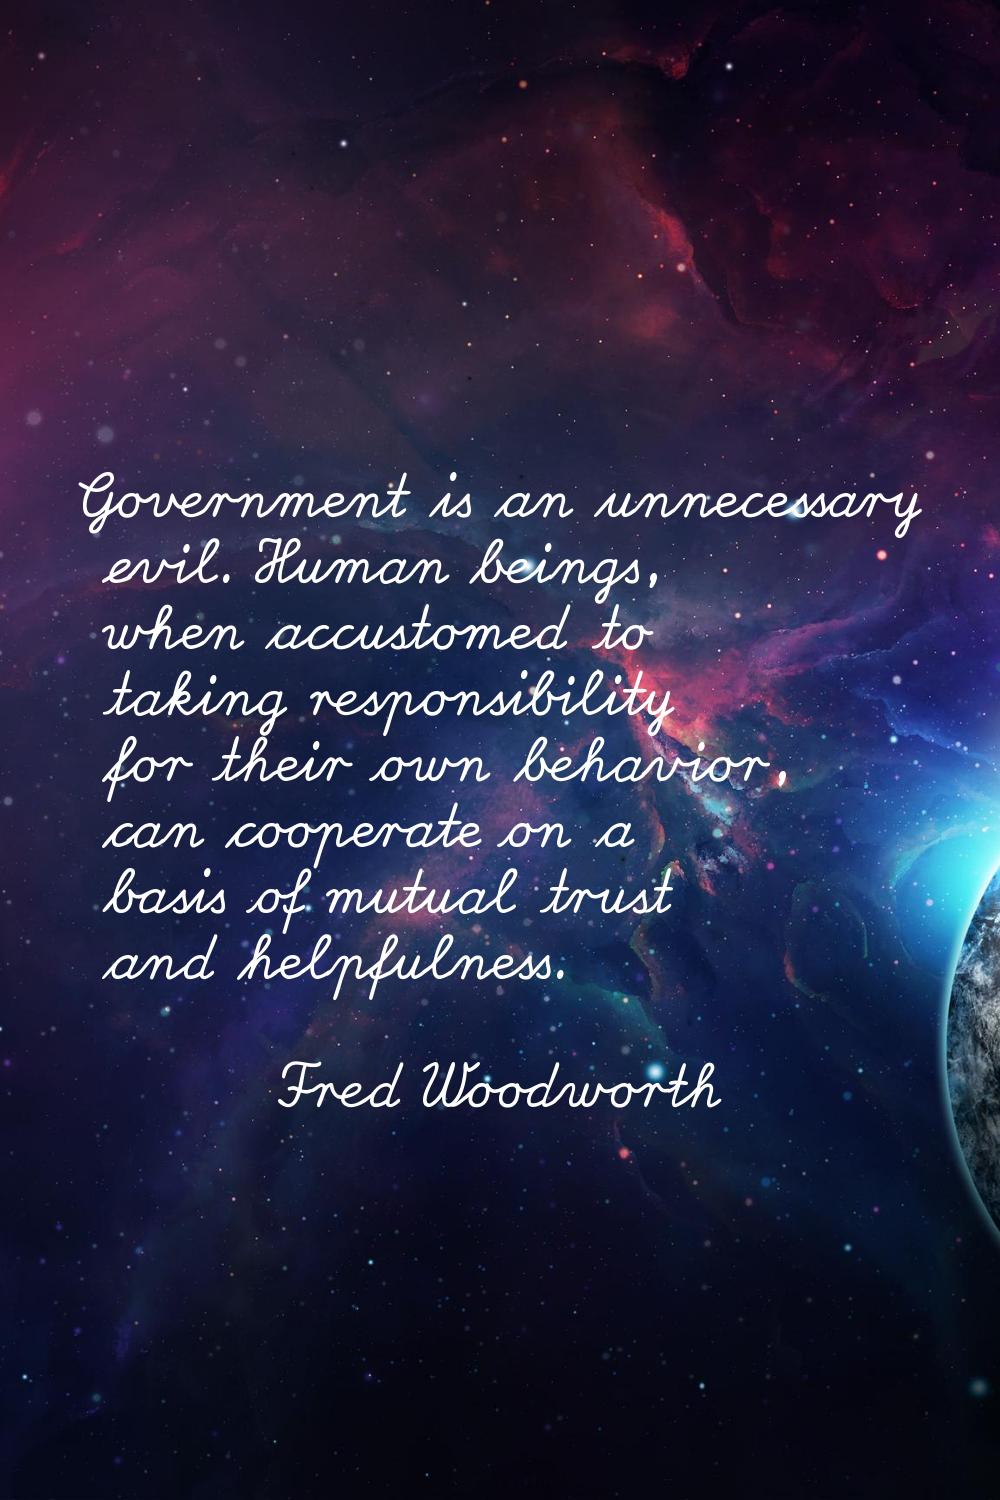 Government is an unnecessary evil. Human beings, when accustomed to taking responsibility for their